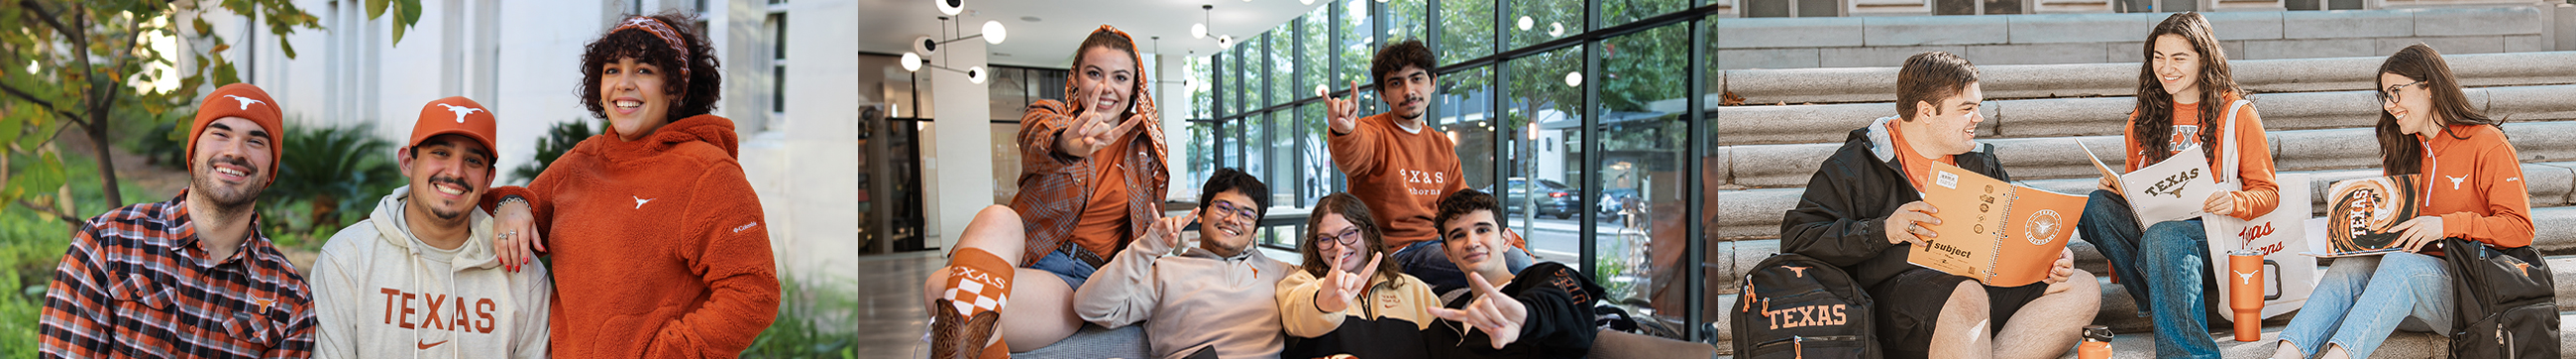 3 photos, each of groups of longhorns around campus wearing longhorn sweaters and outerwear